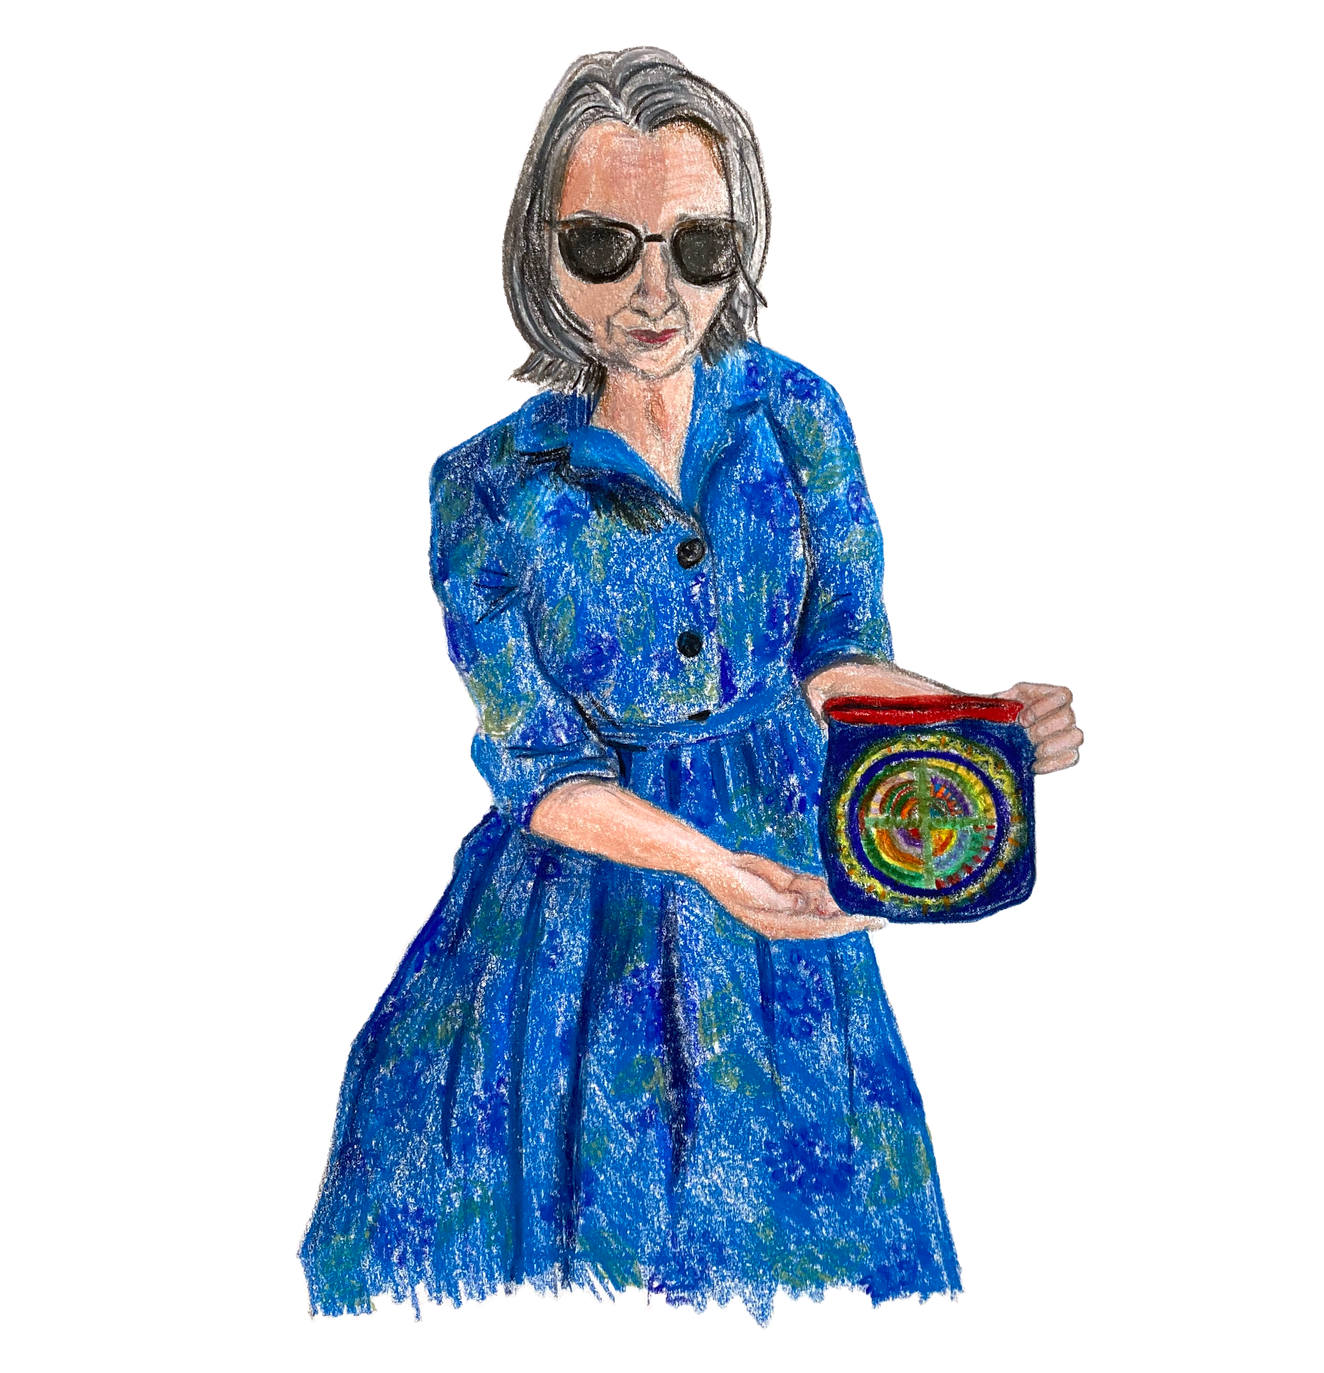 Color pencil drawing of a middle aged white woman in a bright blue dress and sunglasses holding a colorfully embroidered small purse. She is standing; the image extends to her knees.